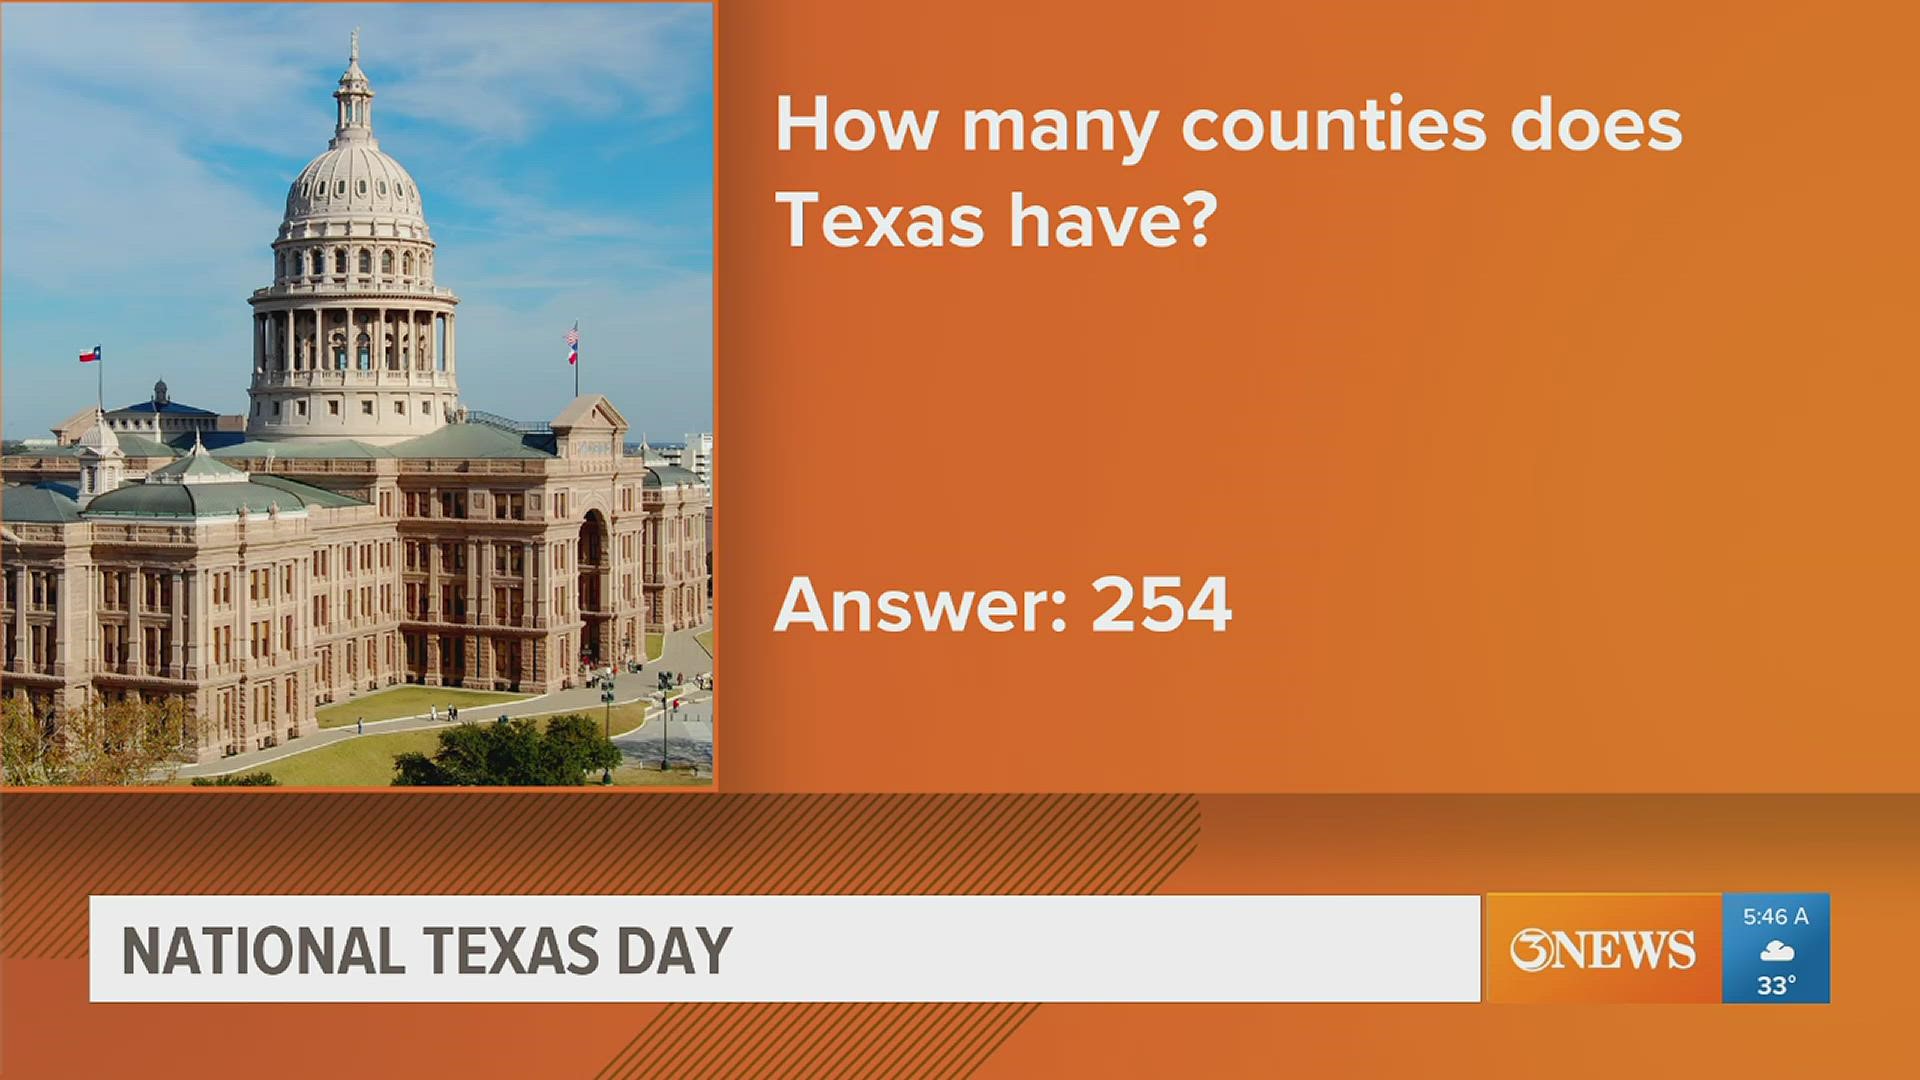 The day is not to be confused with Texas Independence Day, which takes place on March 2nd.